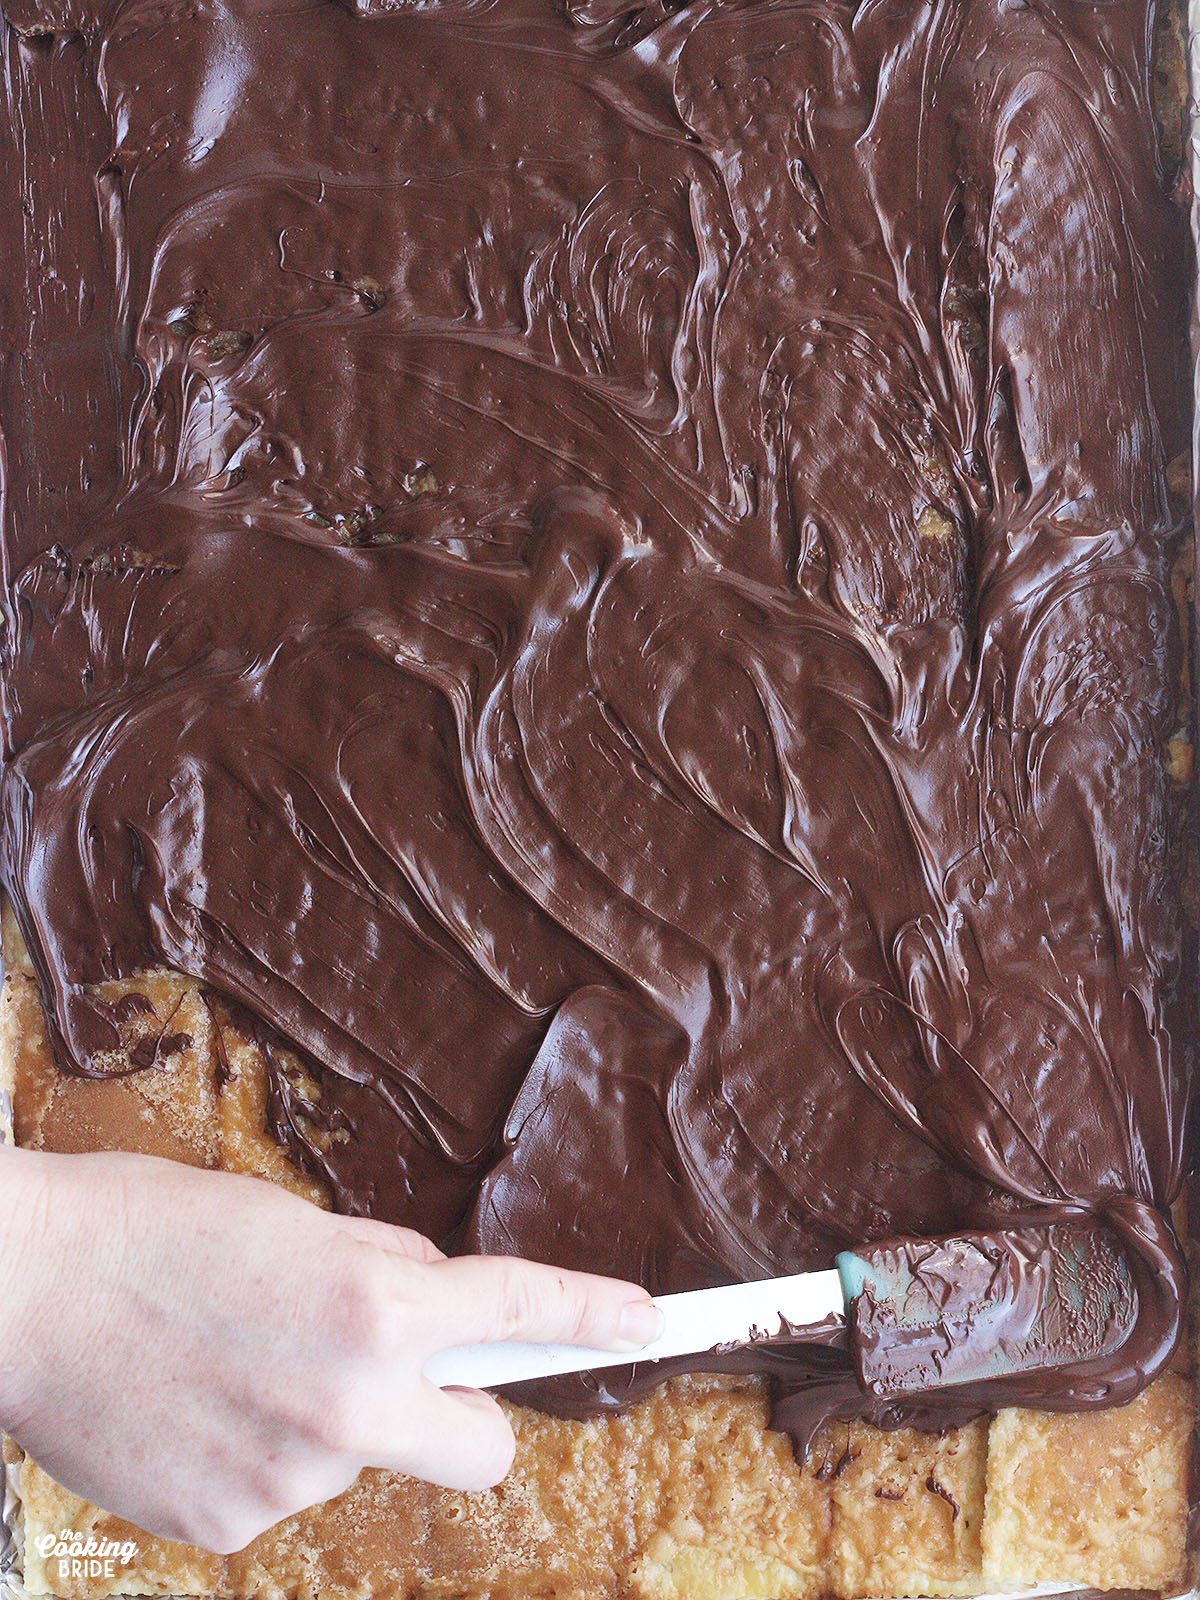 hand using a spatula to spread melted chocolate over the toffee coated crackers